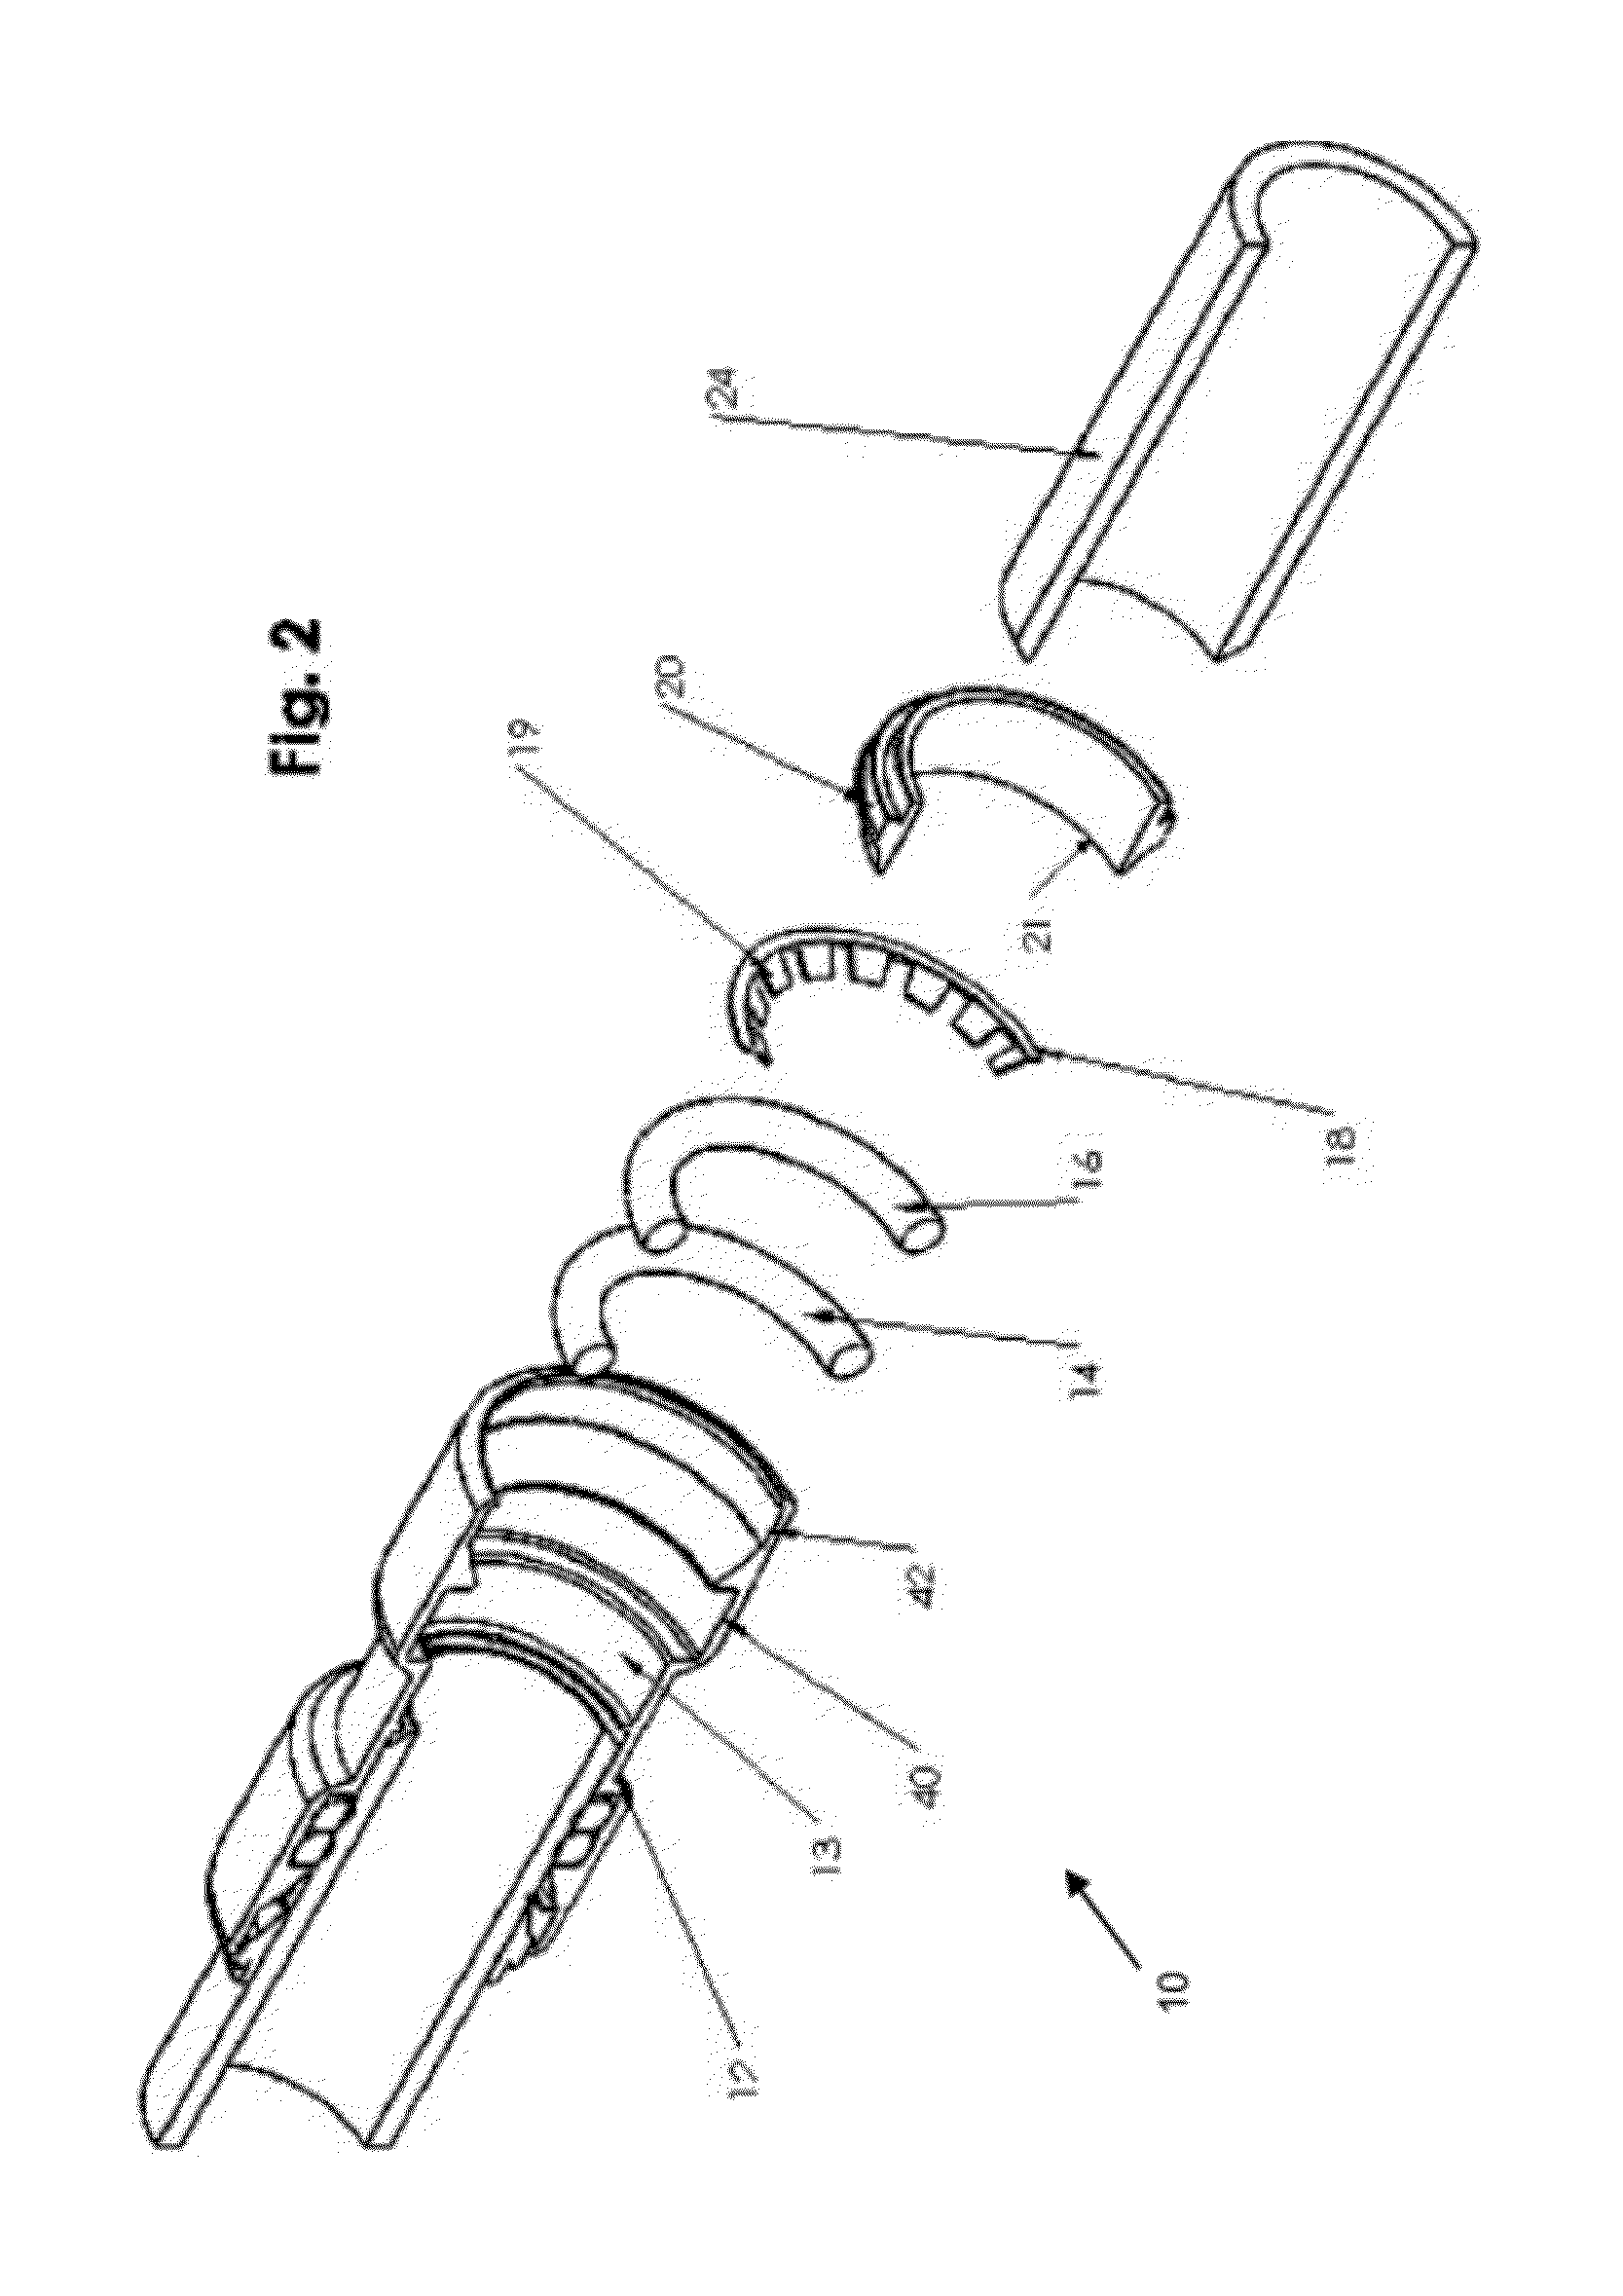 Push connect joint assembly, system and method